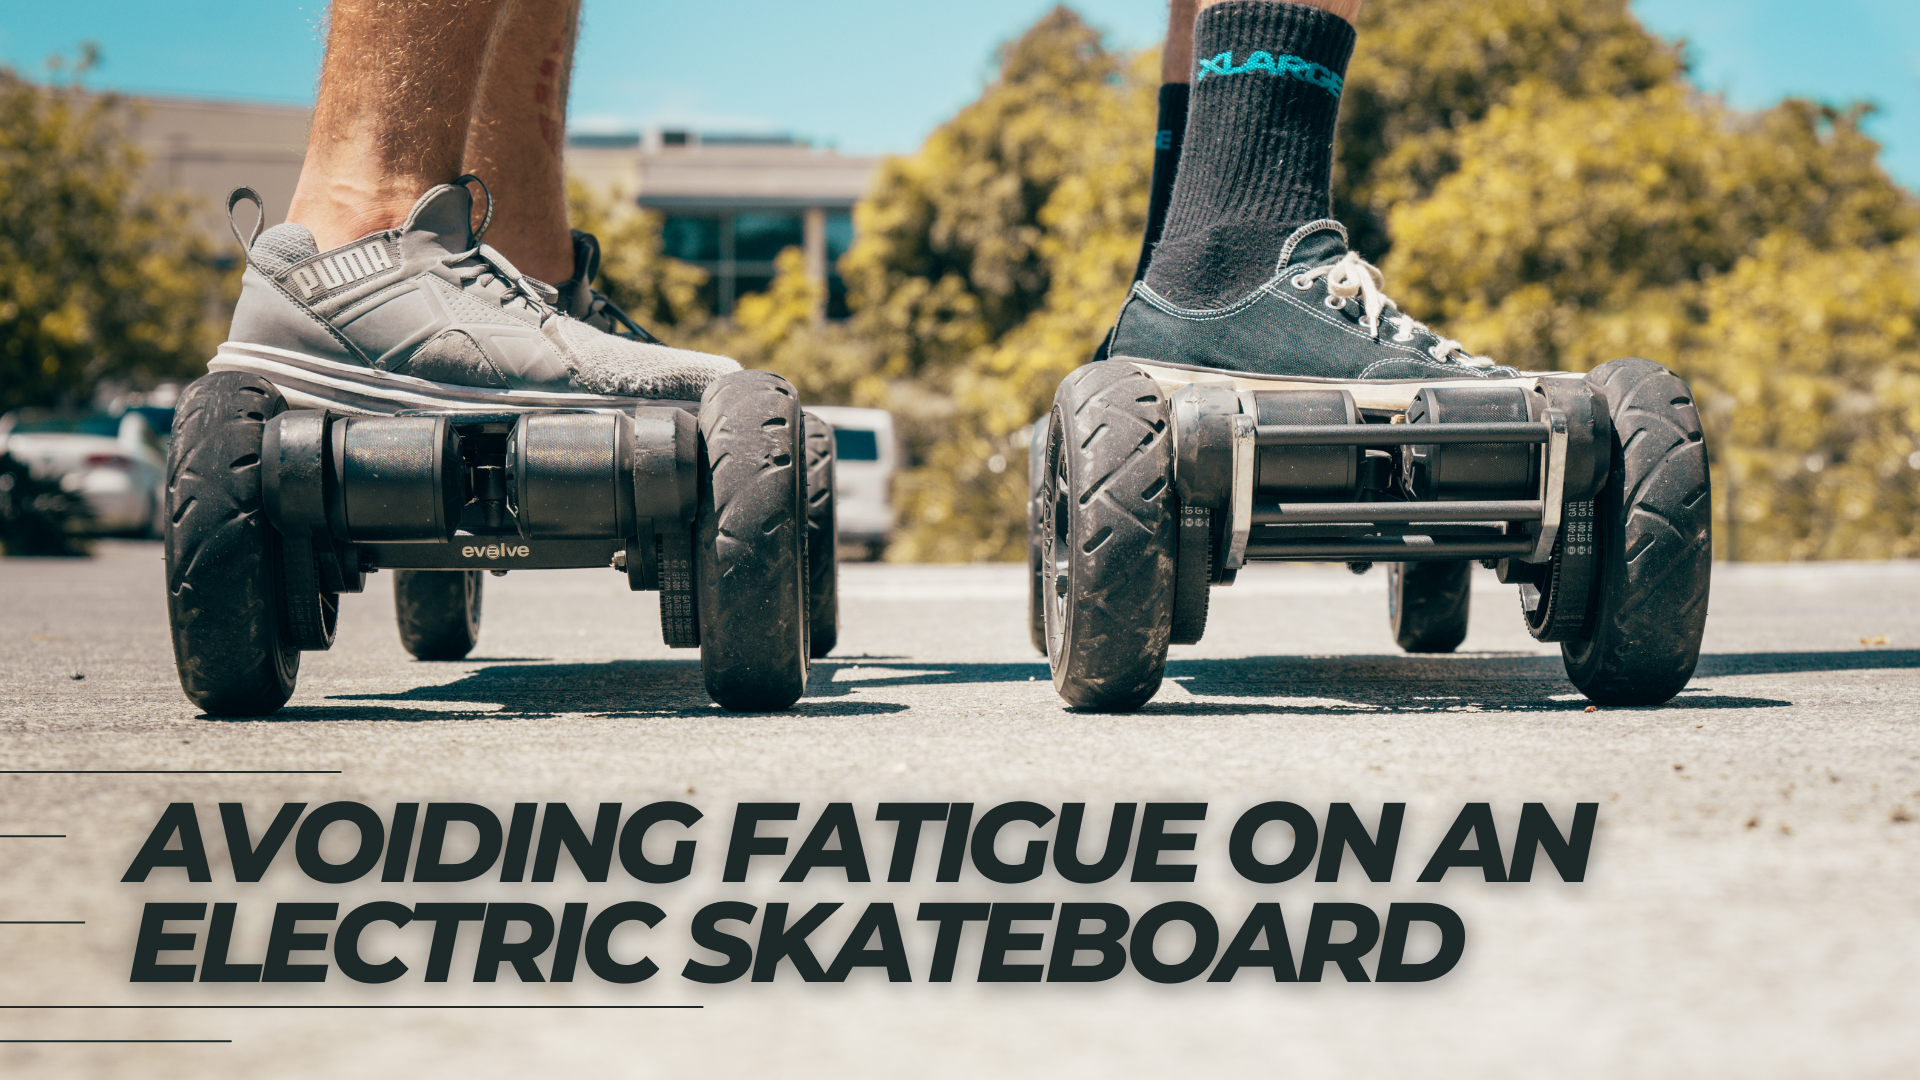 How to Ride an Electric Skateboard and Avoid Sore Feet?